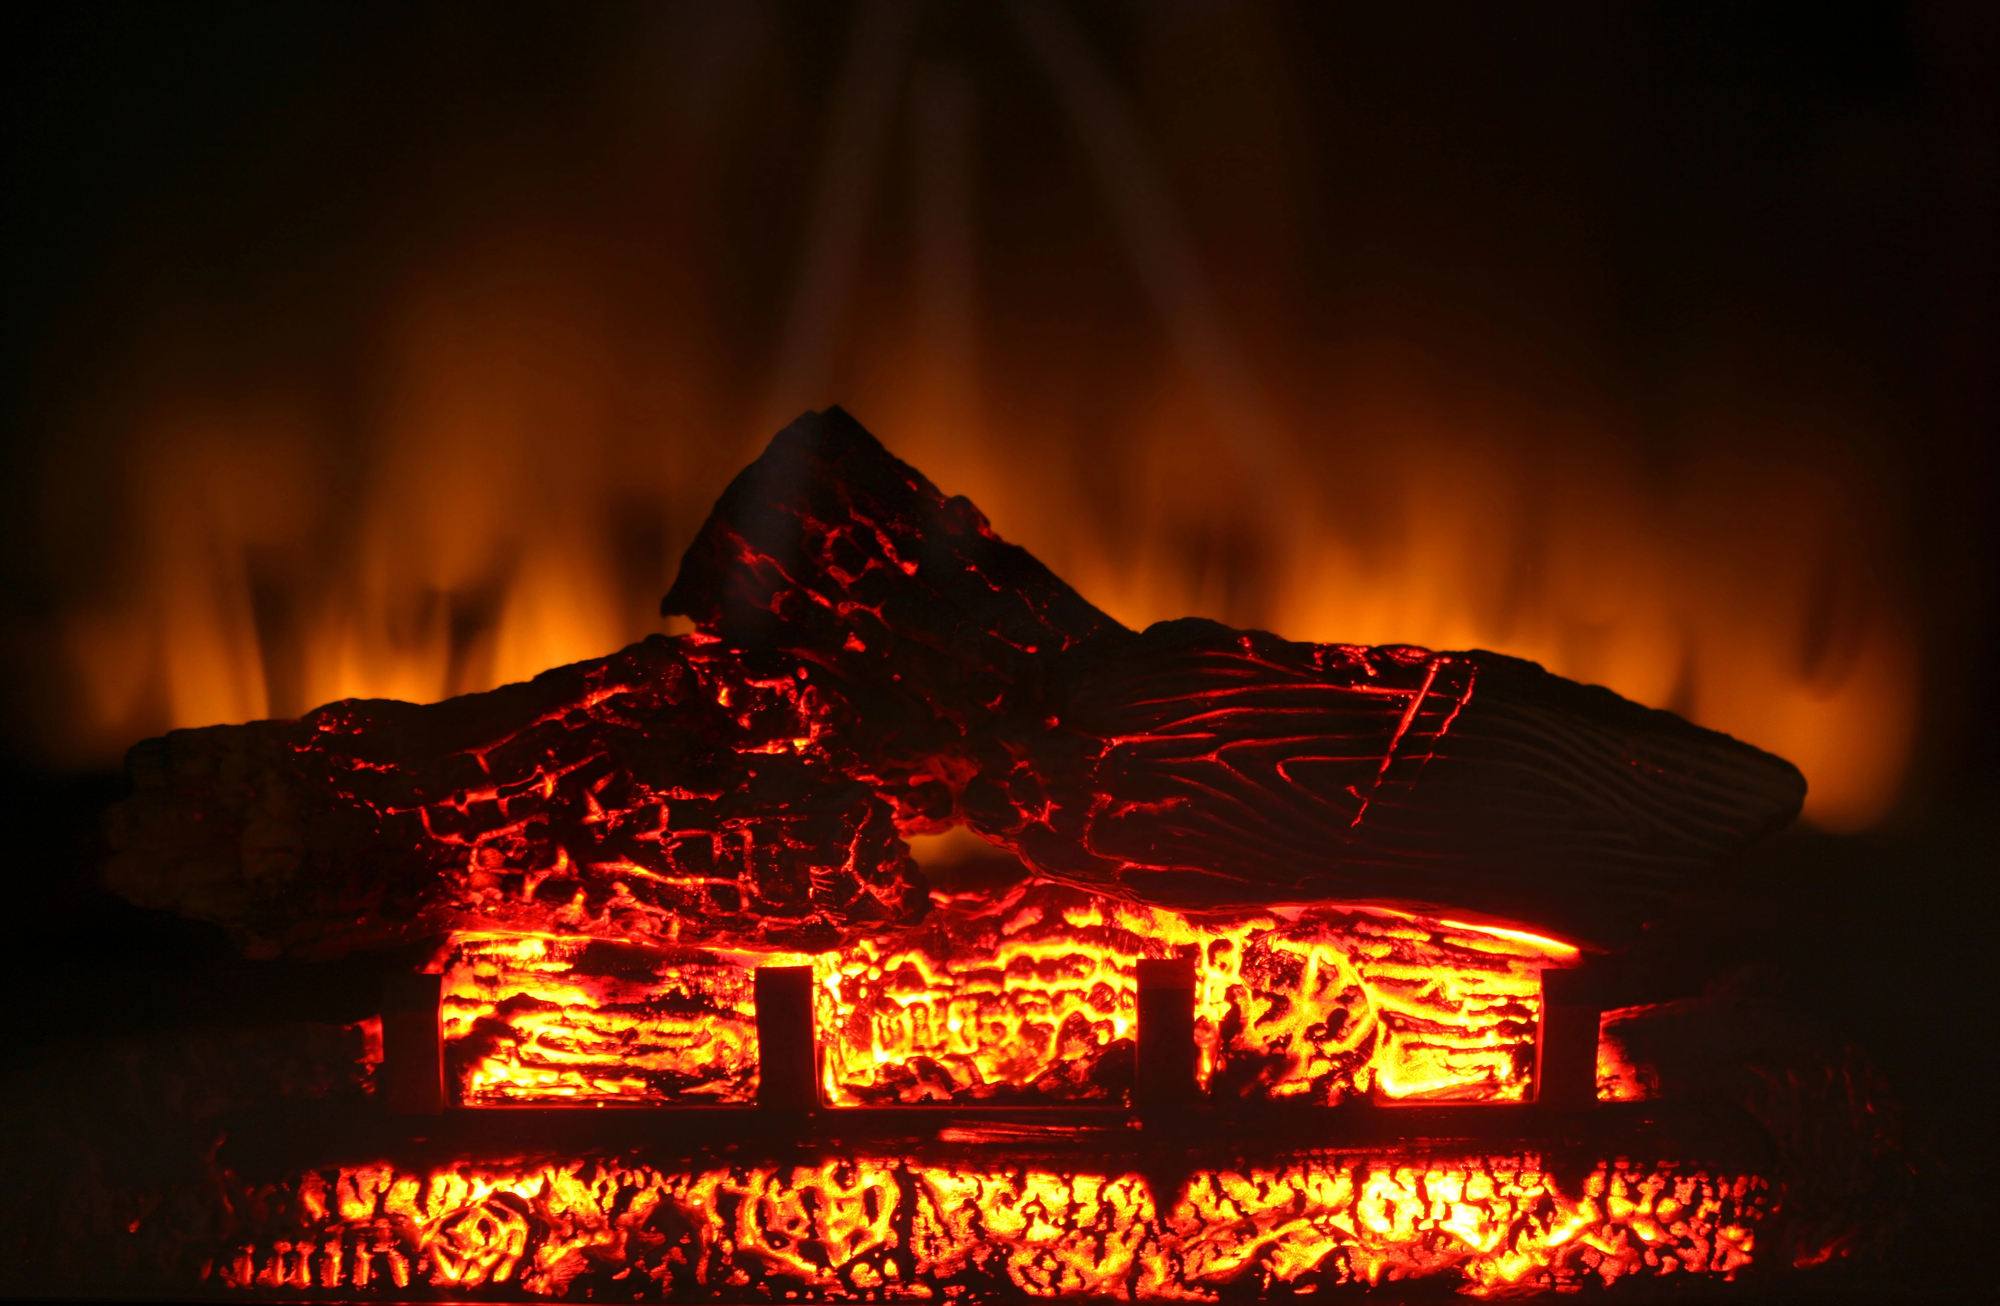 Mid-closeup of electric fireplace shows no-pollution "coals and flames" - photo